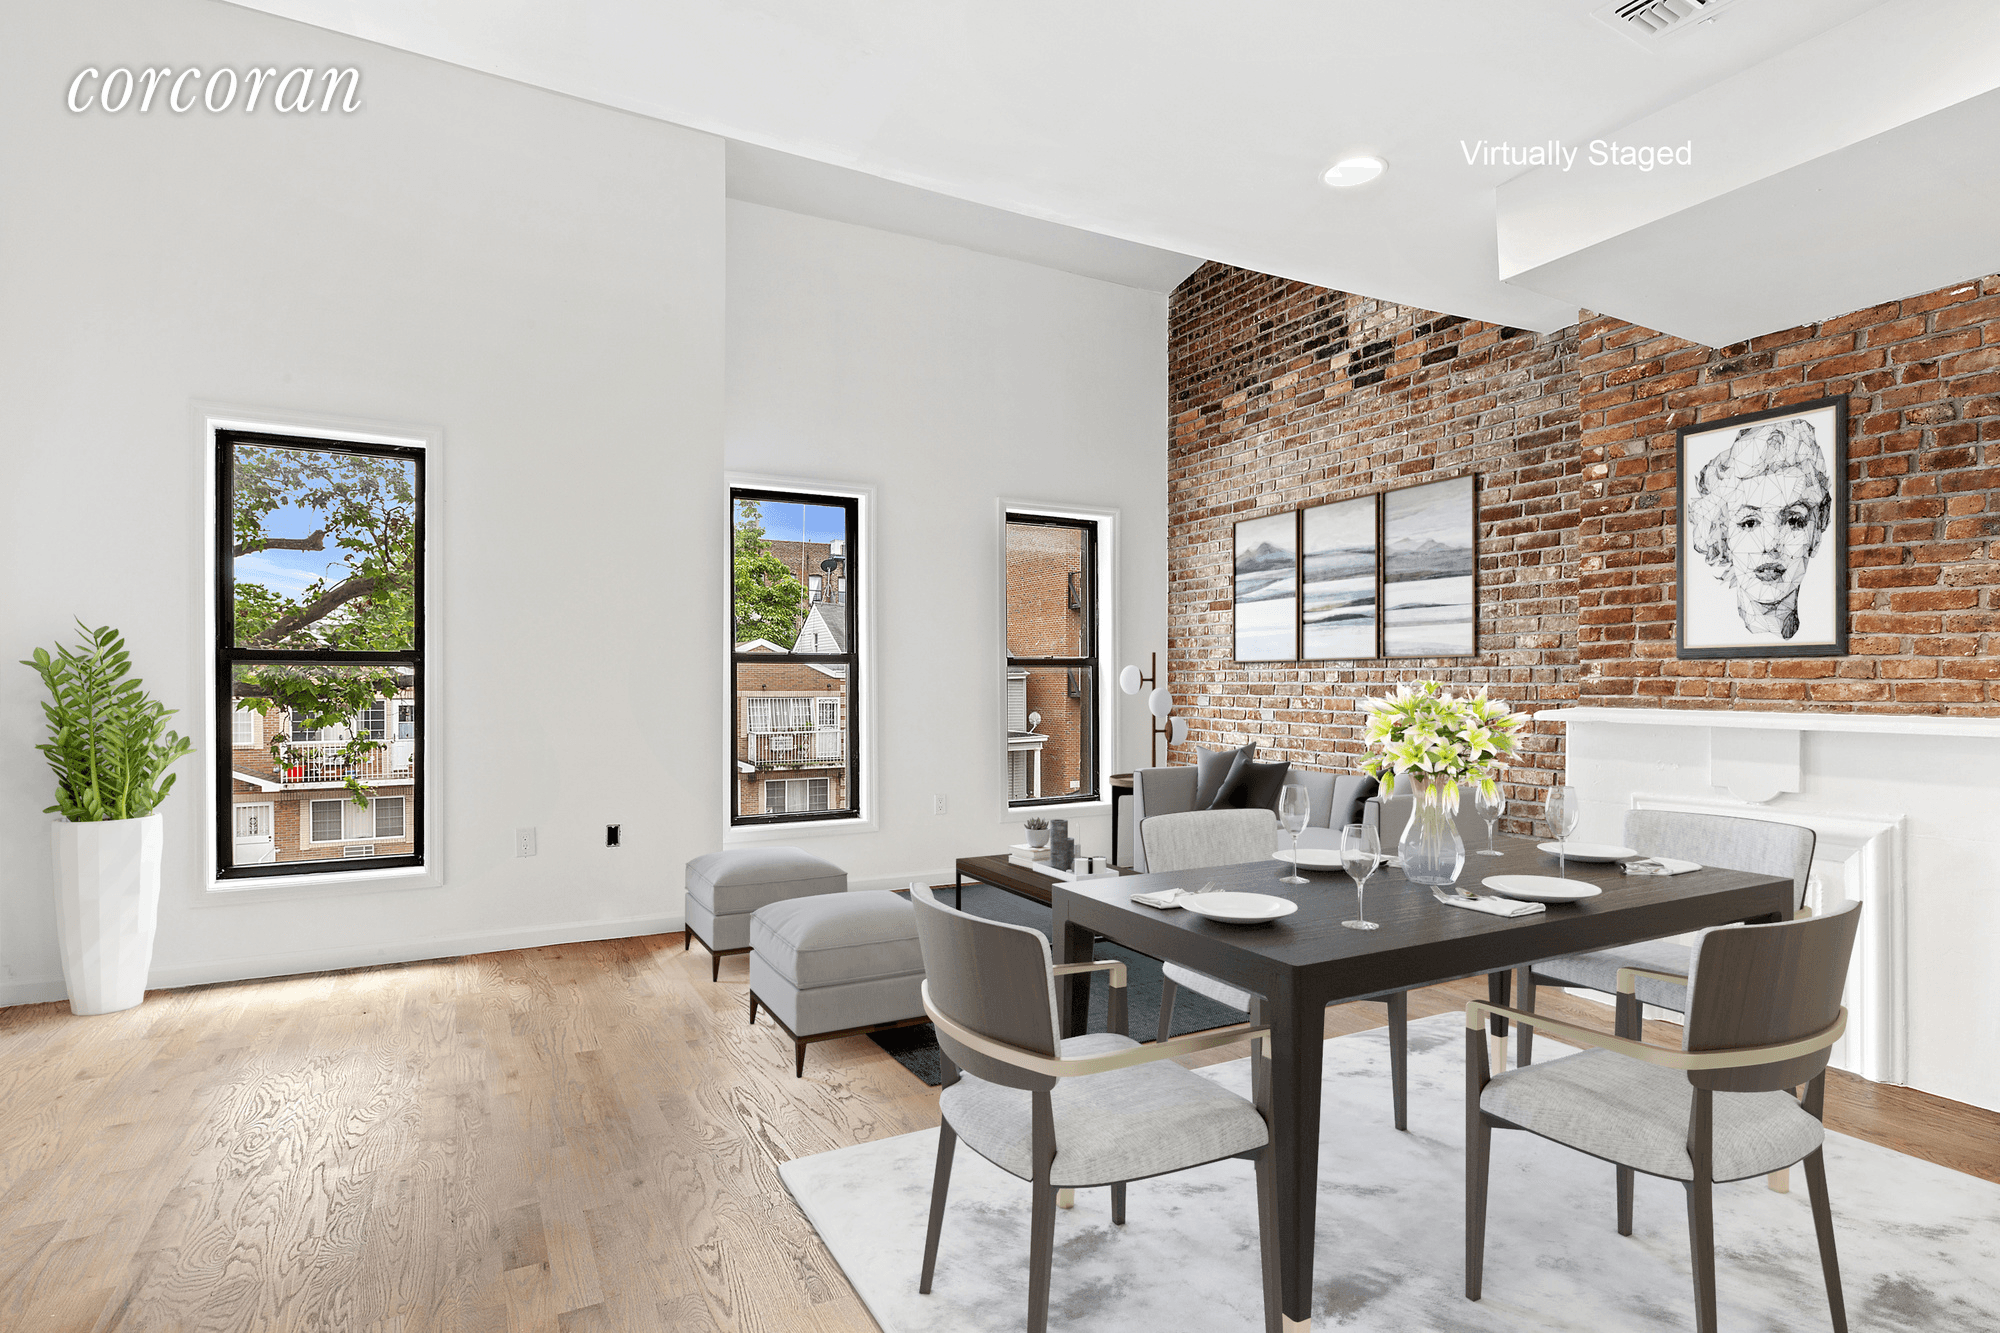 Welcome to 257 Kosciuszko Street an impeccably renovated 4 bedroom duplex brownstone apartment in the heart of Bedford Stuyvesant.